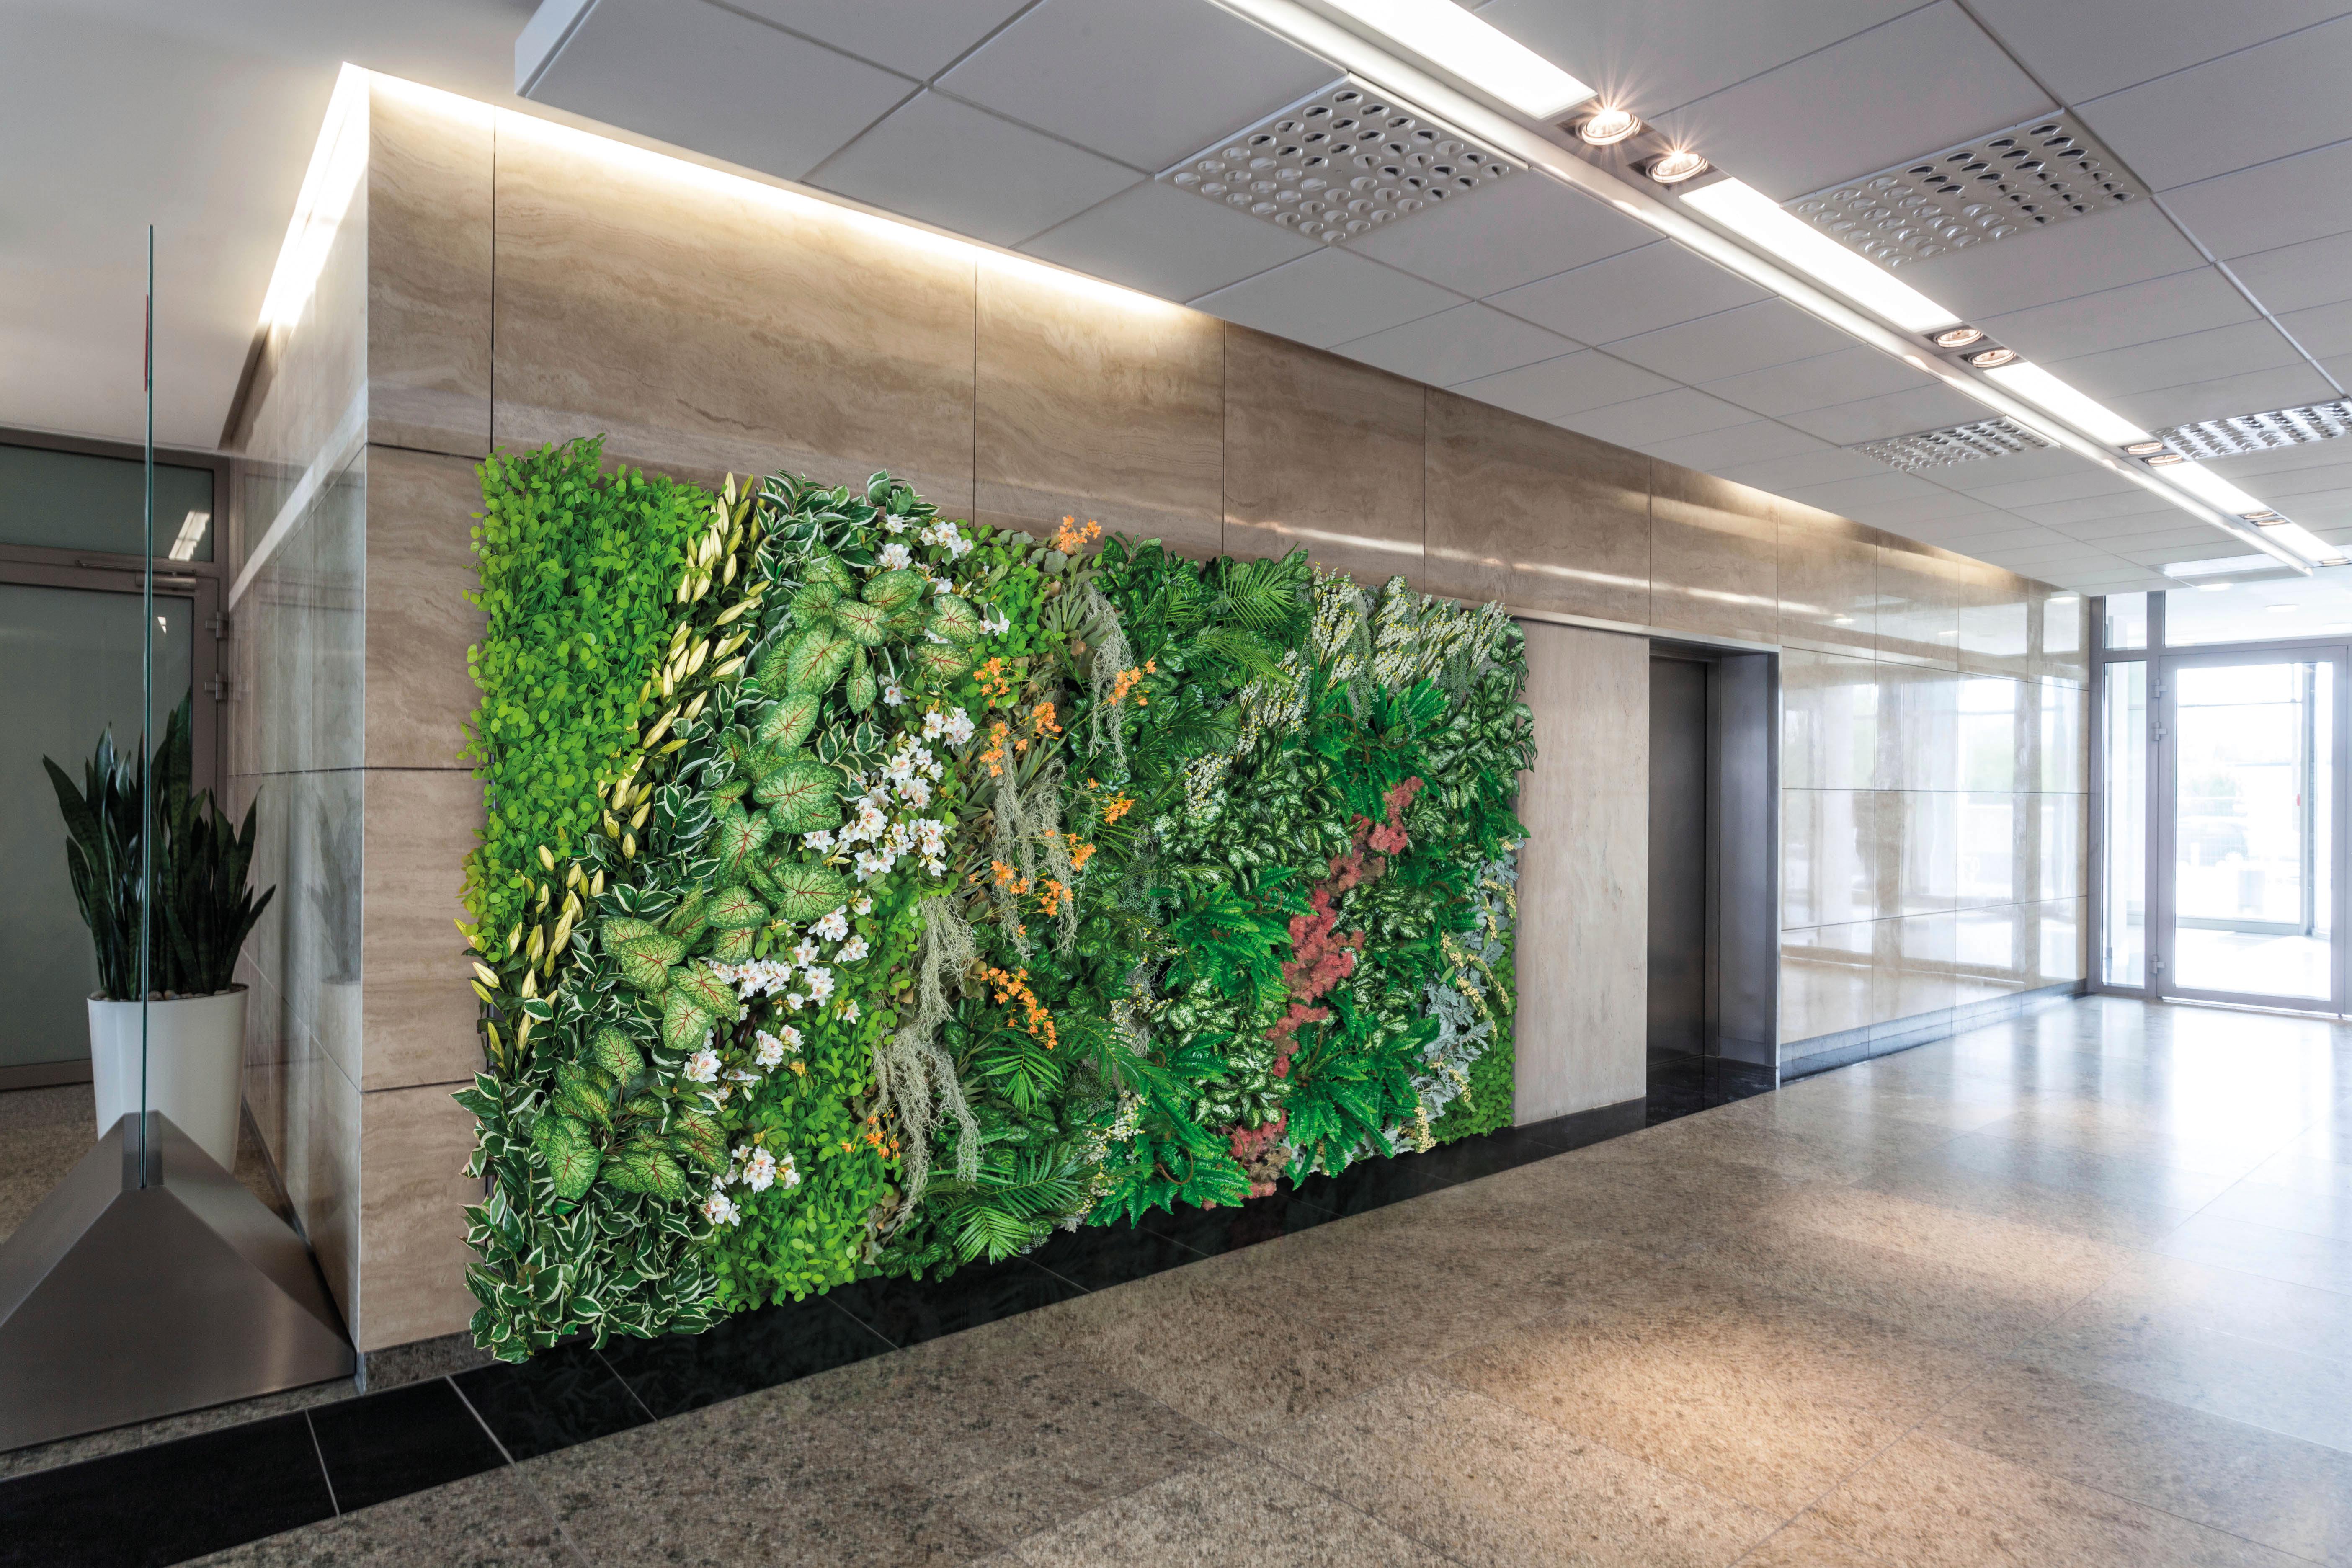 Custom made artificial vertical gardens created by our flower designers, featured by a strong visual impact and high quality that faithfully reflects real plants.
Ideal for decorating commercial or residential locations with a “inspired by nature”